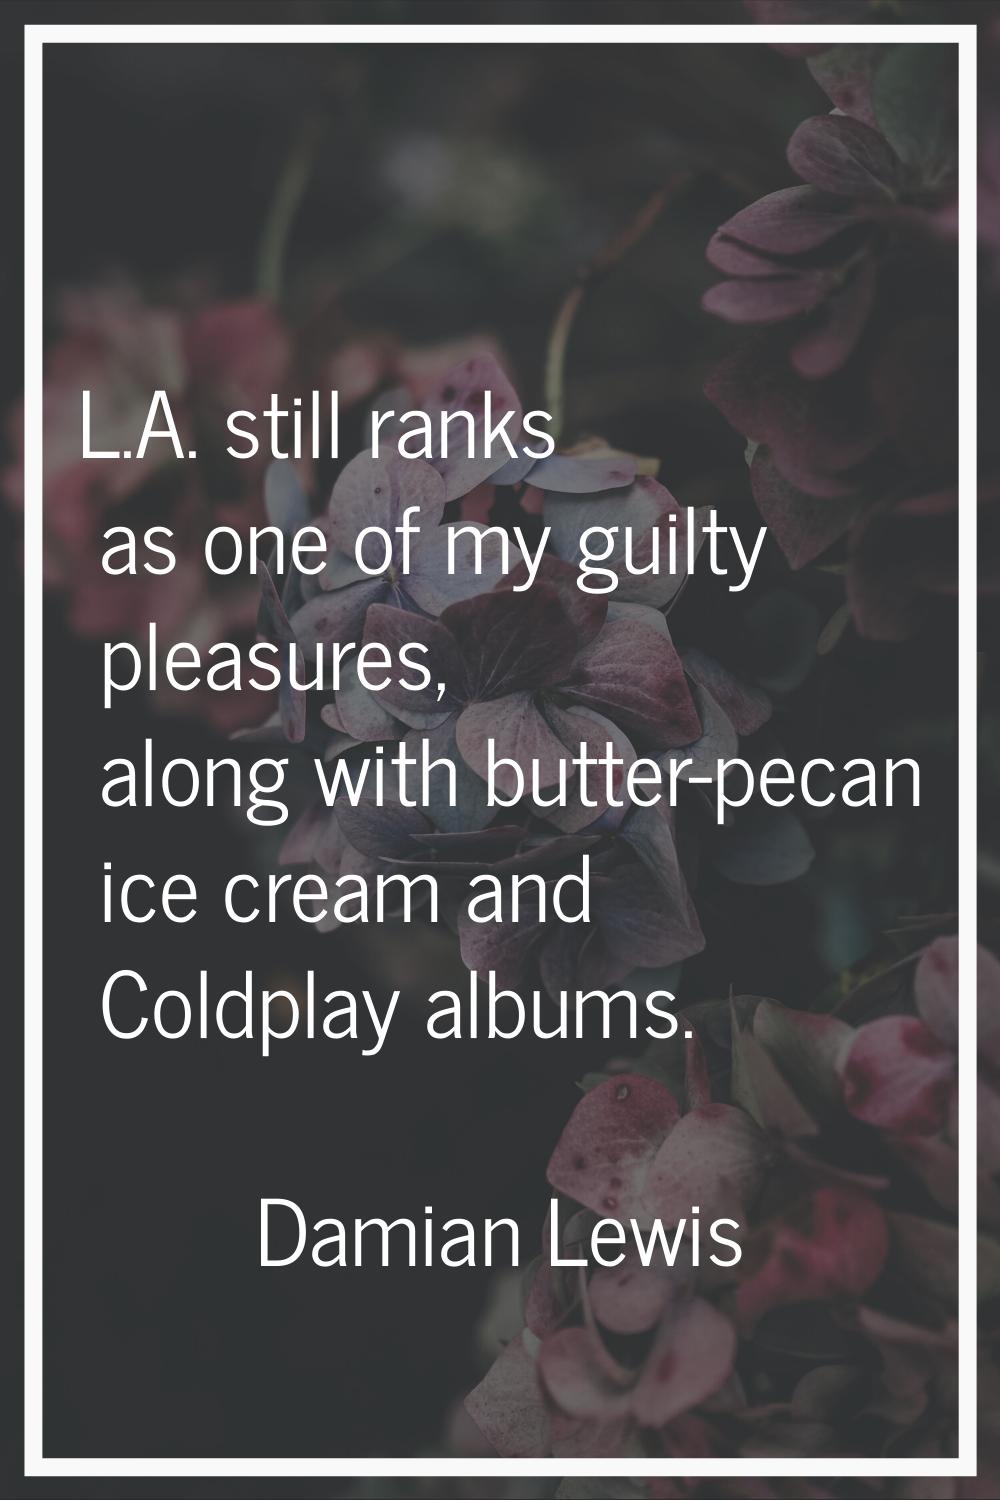 L.A. still ranks as one of my guilty pleasures, along with butter-pecan ice cream and Coldplay albu